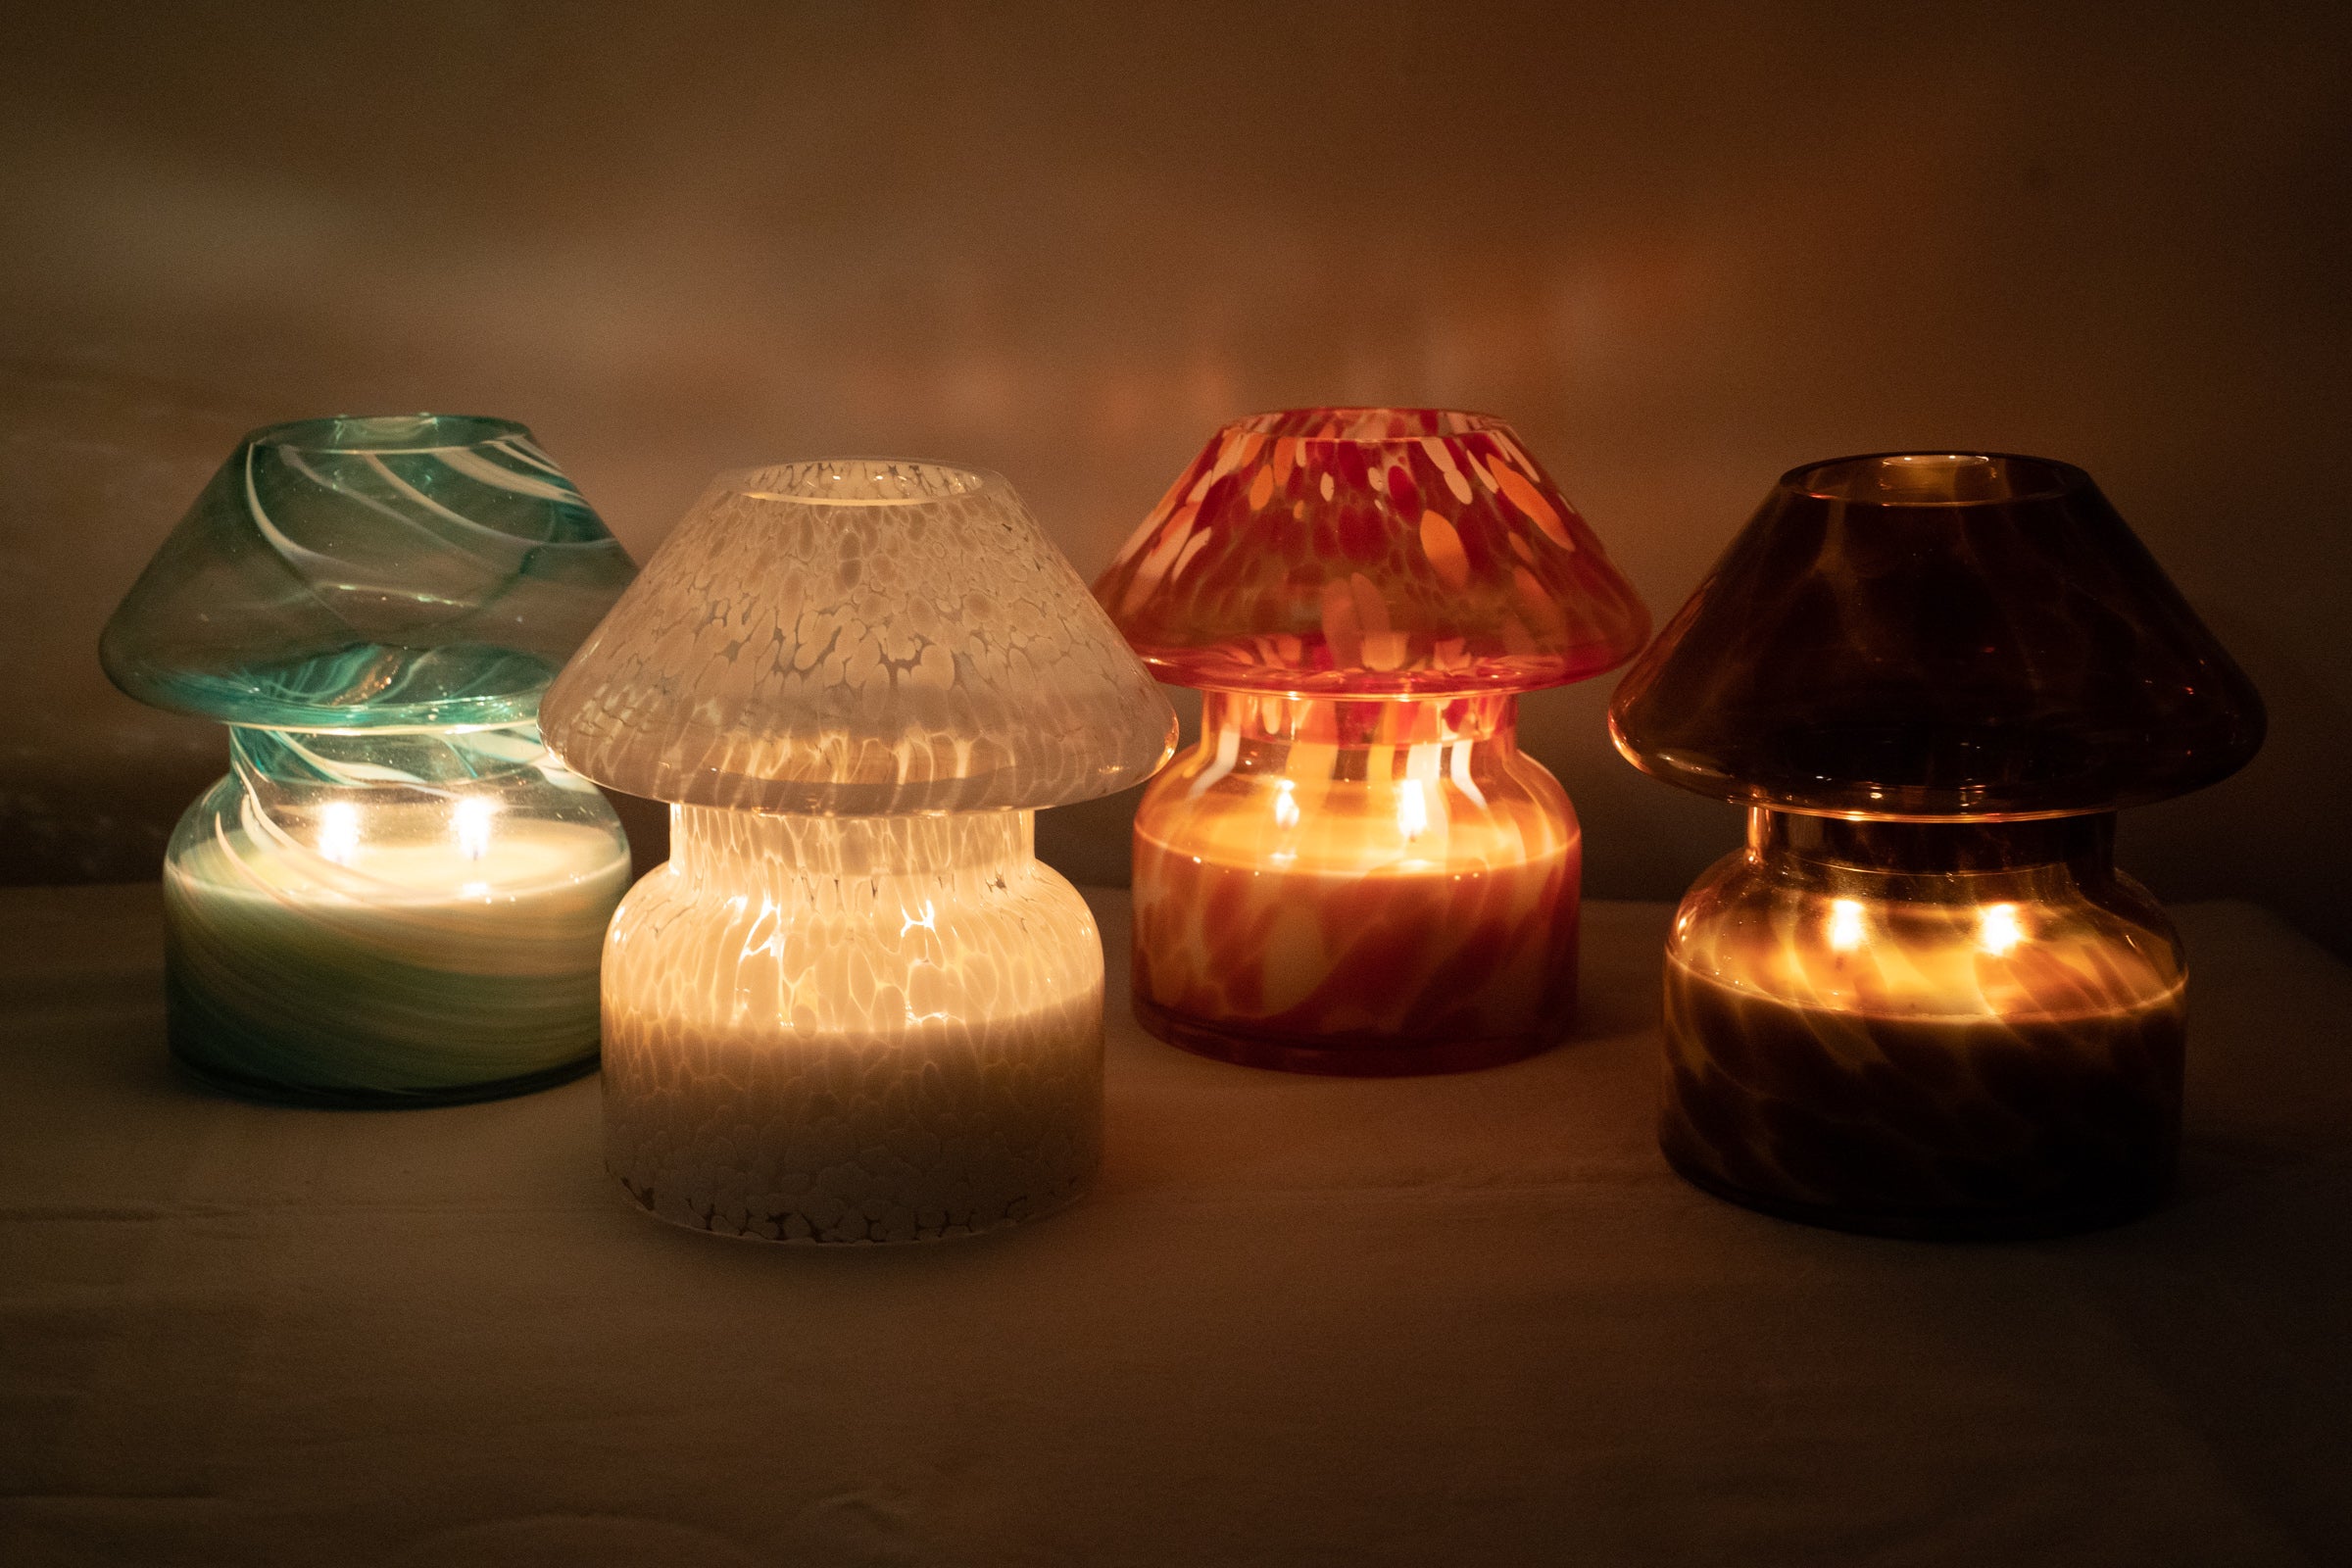 Mushroom candle lamp with white spots on clear glass. Candle lamp is lit next to 3 different coloured mushroom lamps.